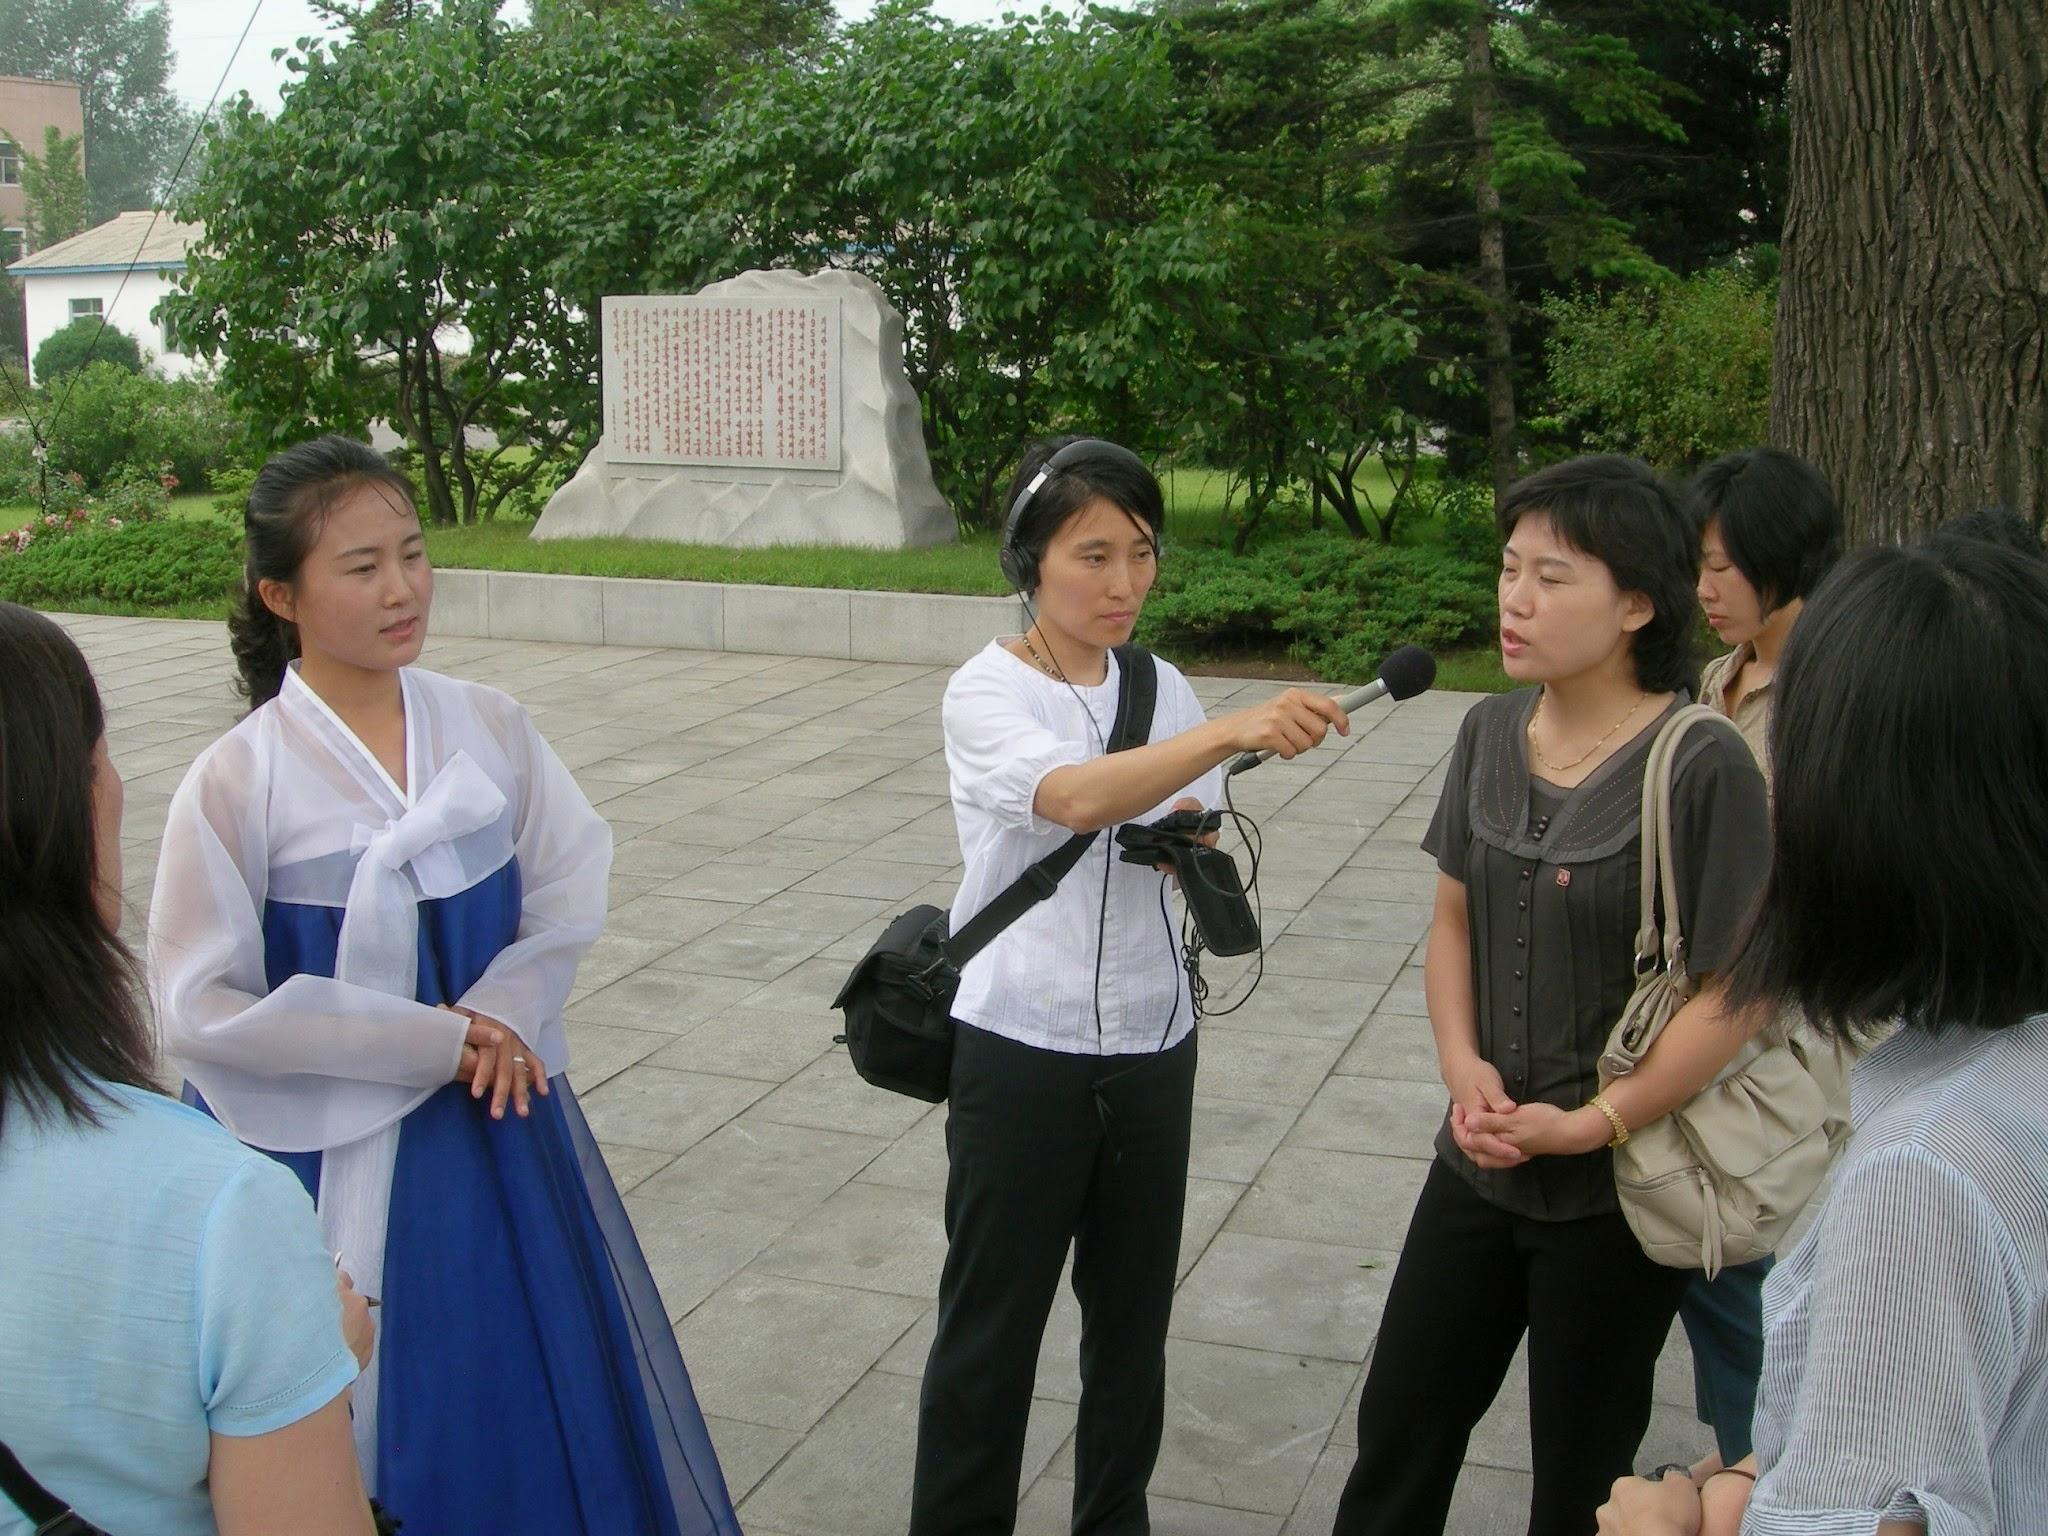 Hyun is wearing white and is wearing some audio gear and recording another woman in north Korea. There are other women surrounding them and they are standing in front of a small monument.